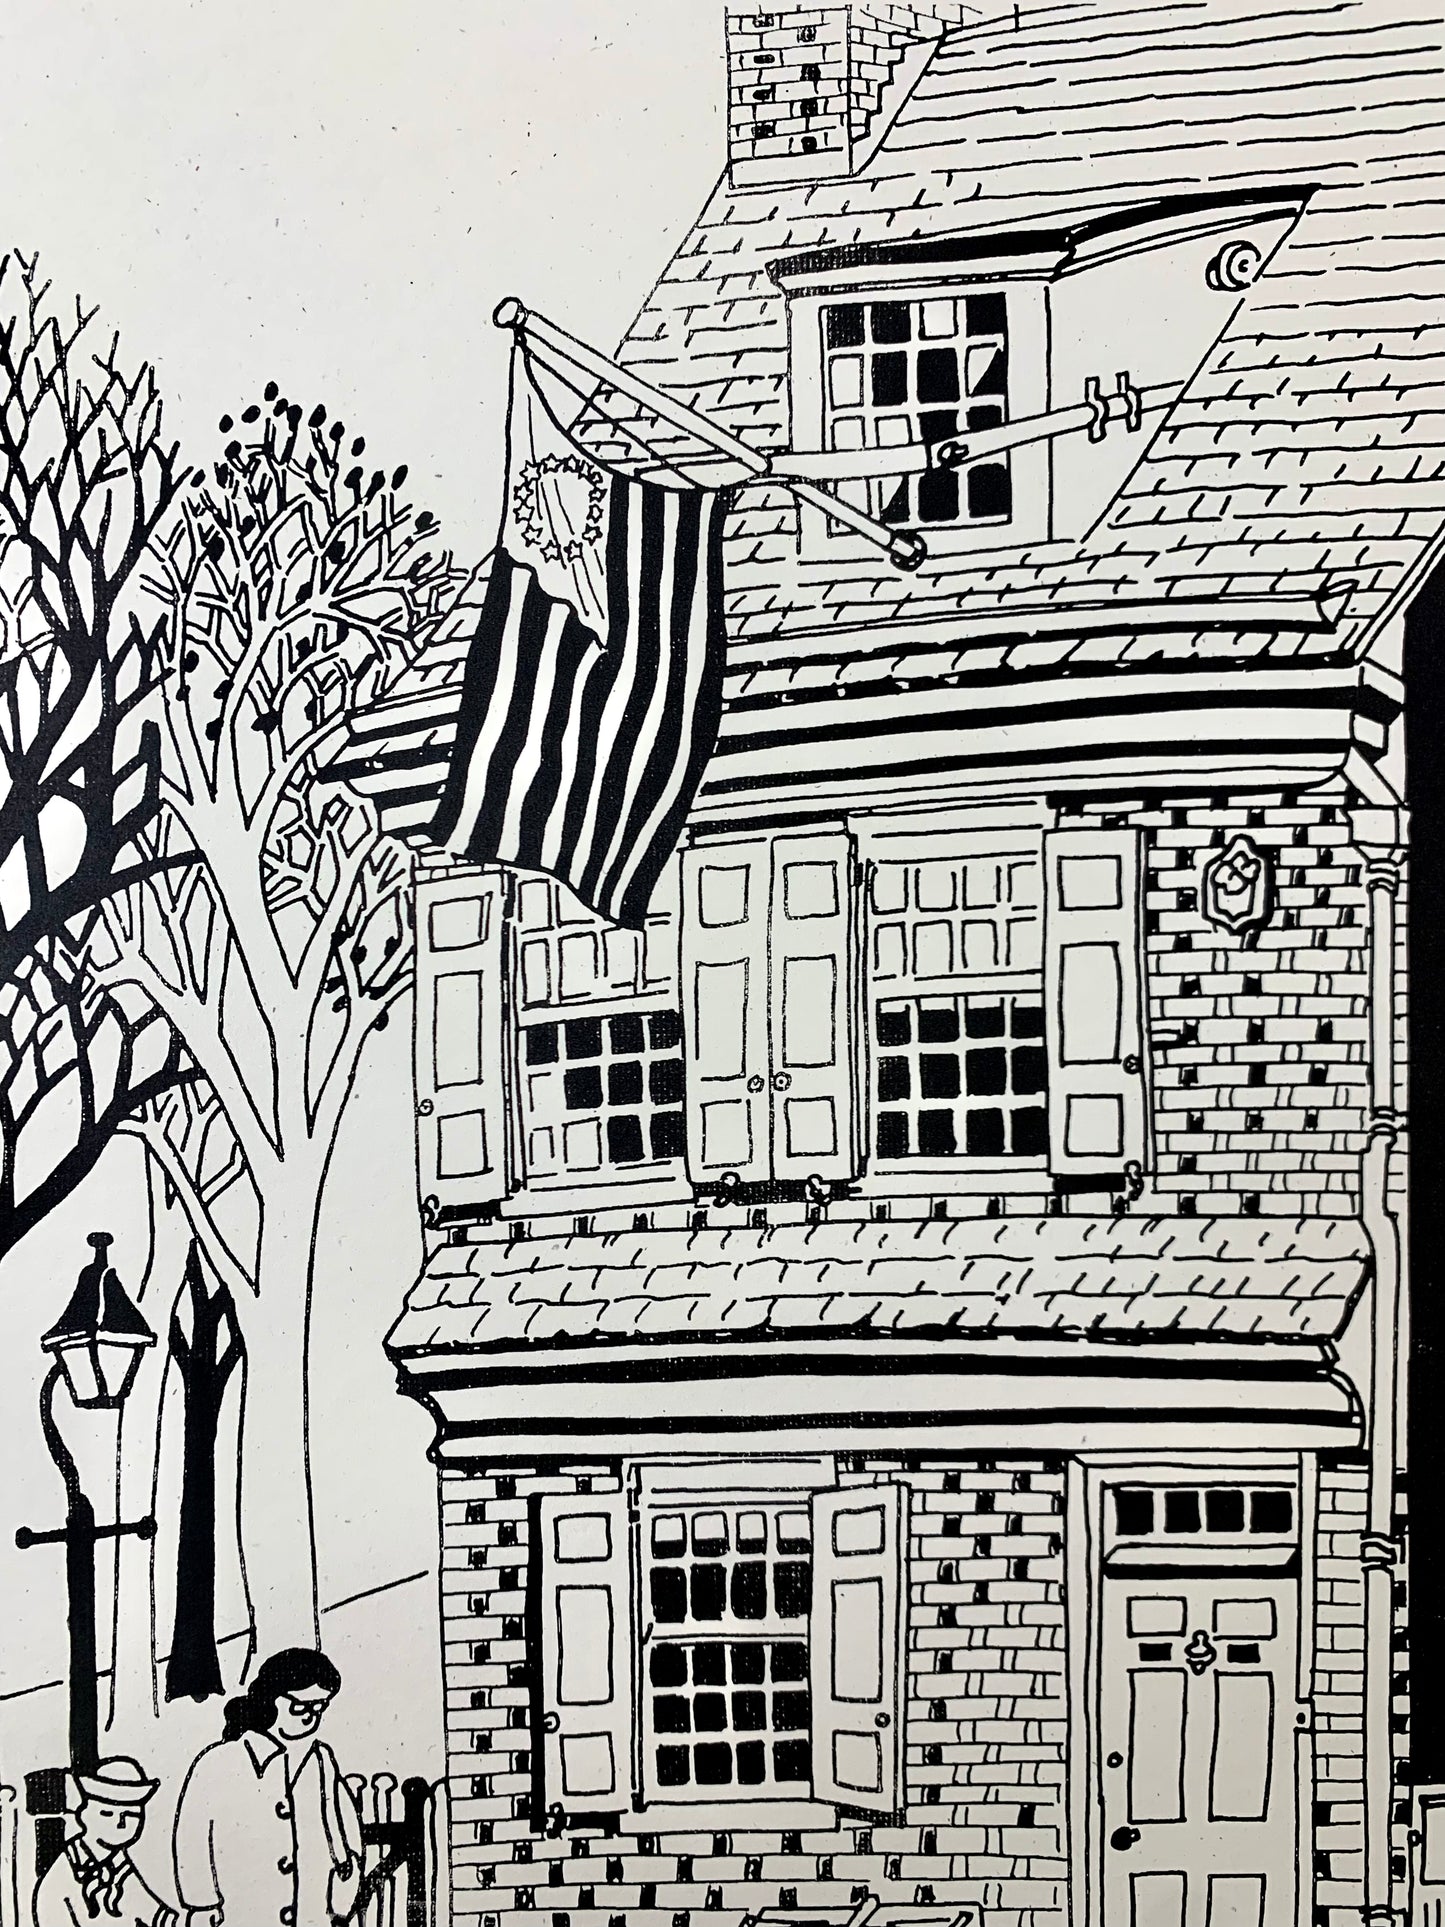 H.R. Latch “Betsy Ross House” Print